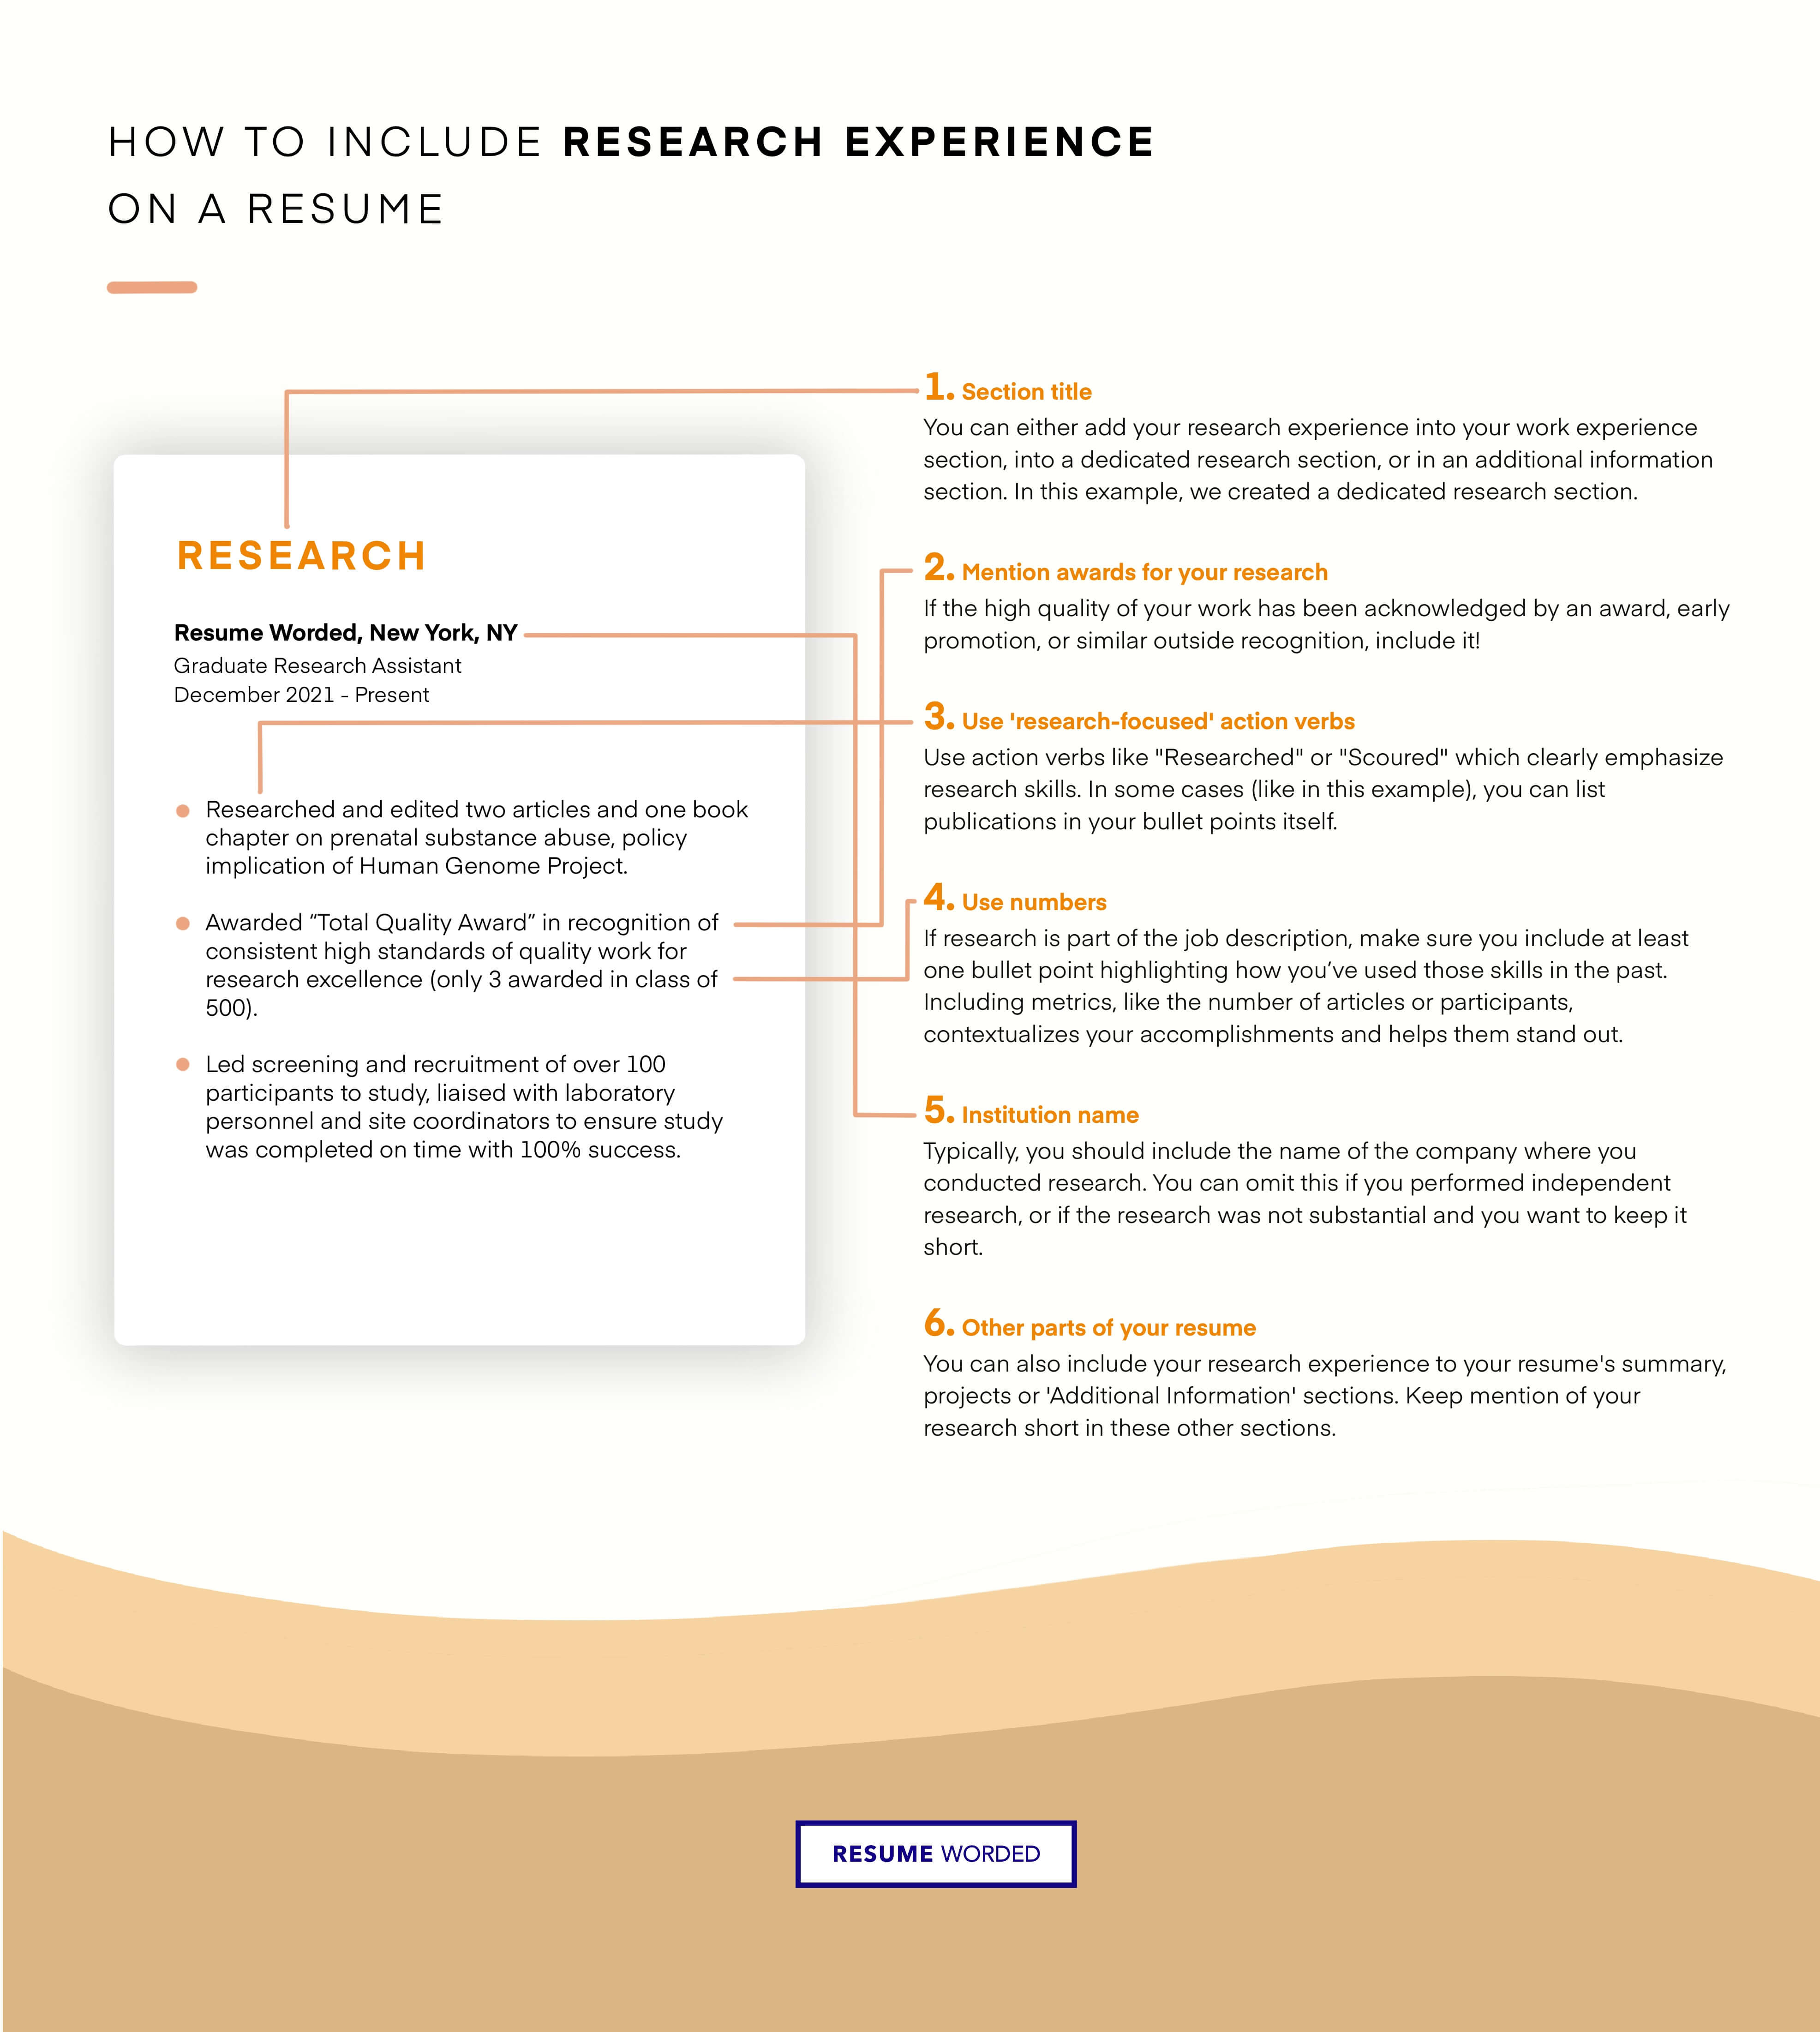 Include research experience from college. - Qualitative Research Assistant Resume